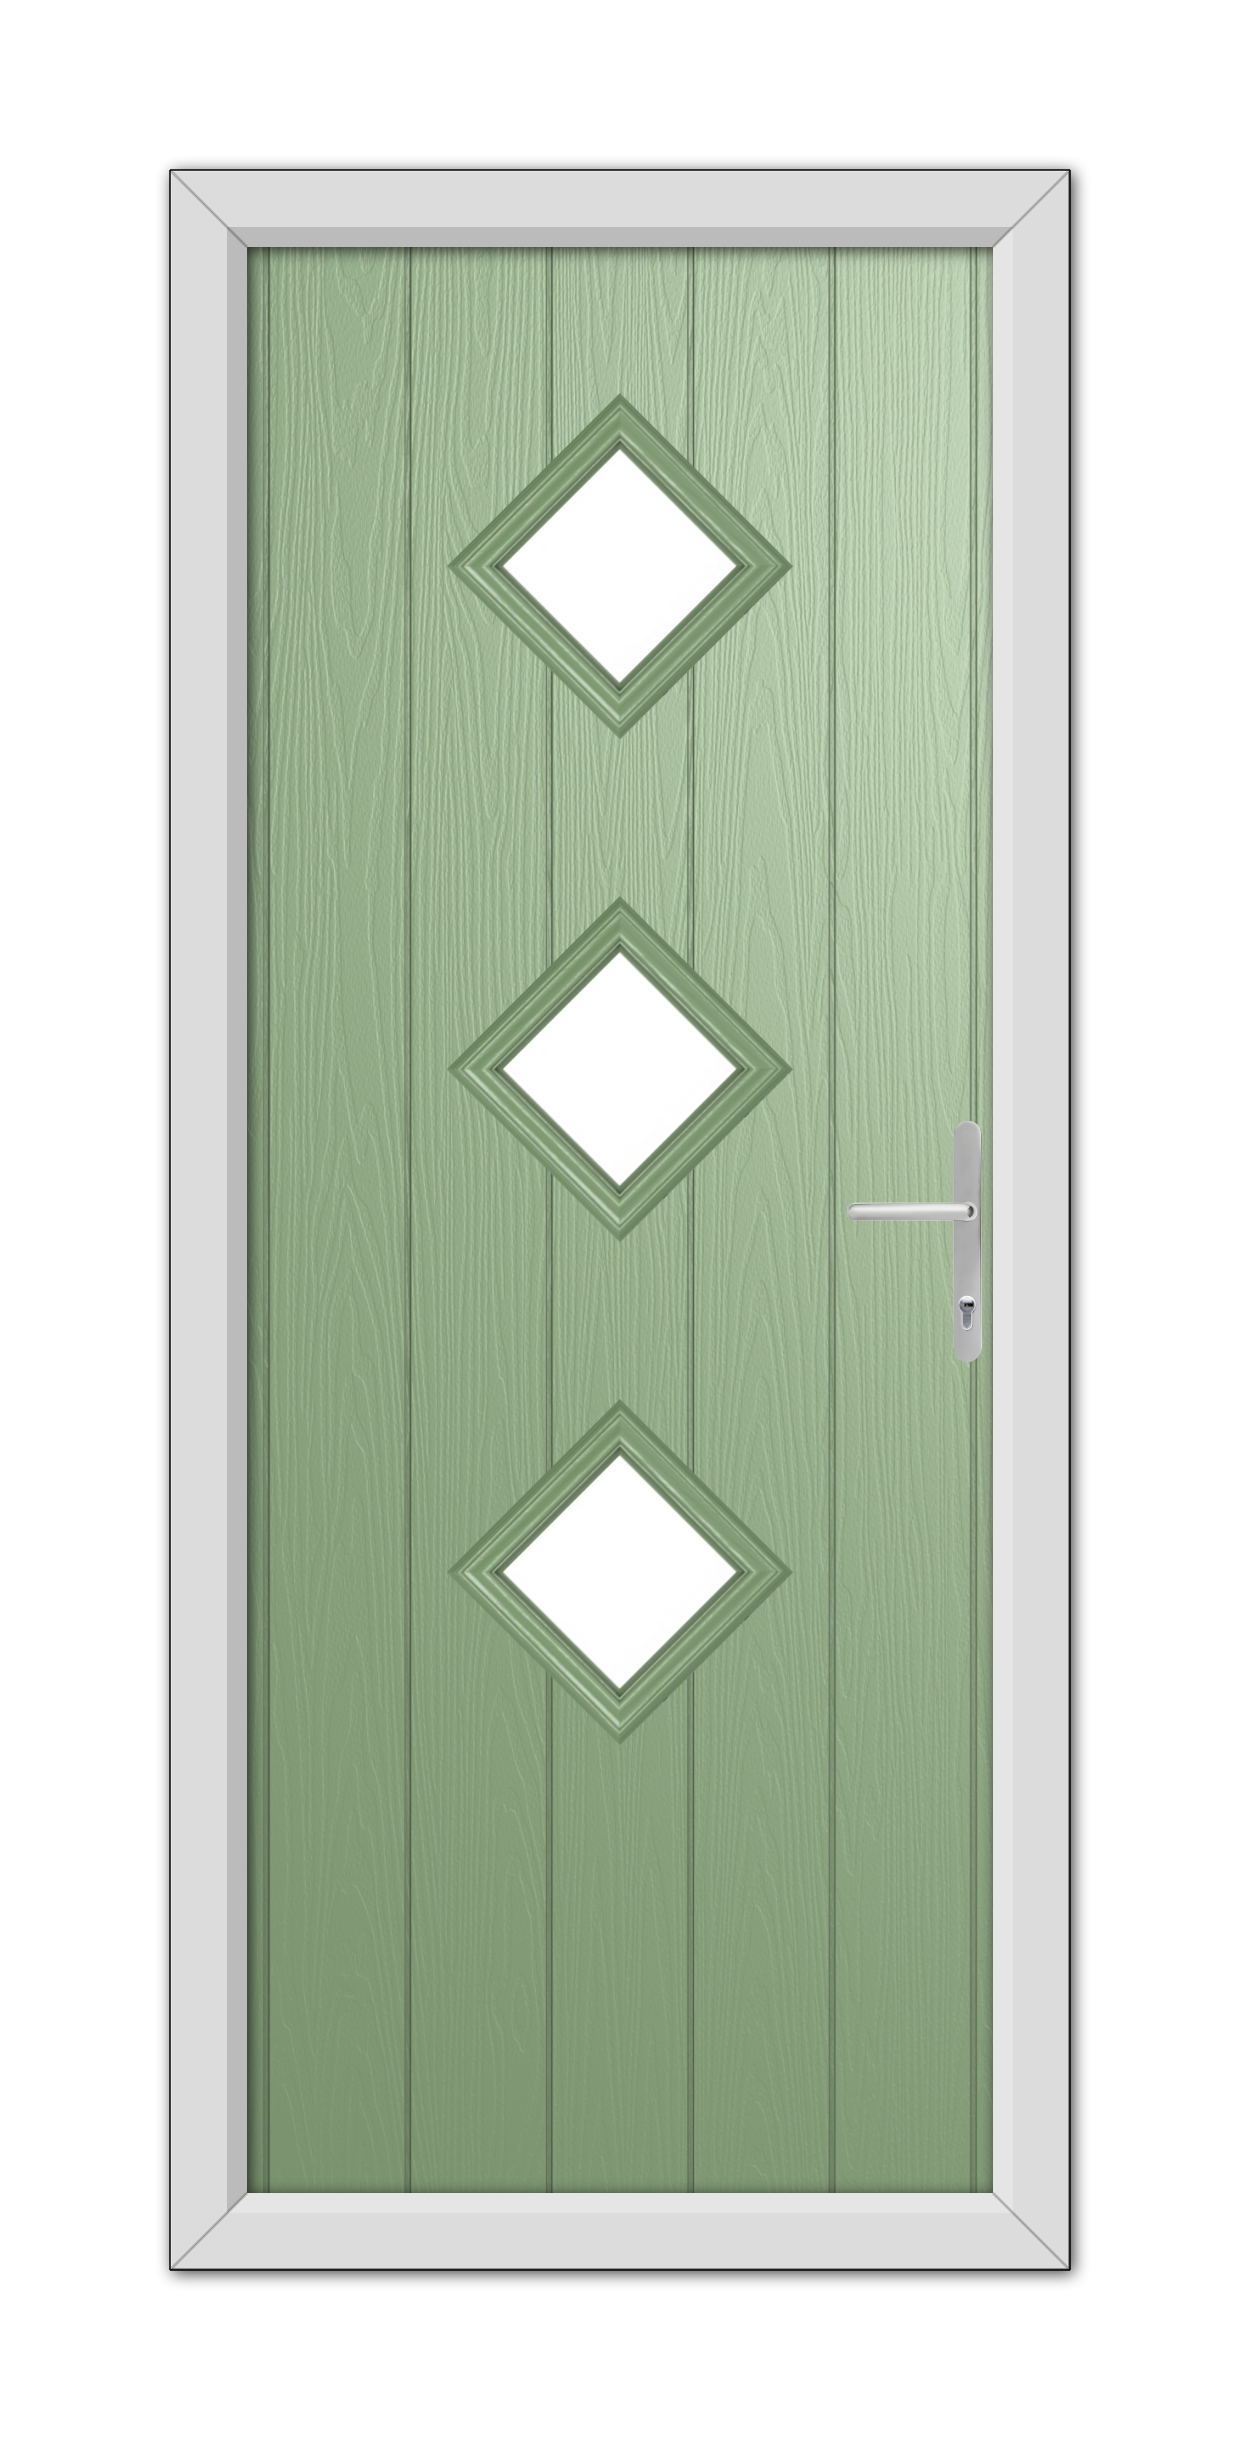 A Chartwell Green Richmond Composite Door 48mm Timber Core with three diamond-shaped glass panels and a modern lever handle, set within a gray frame.